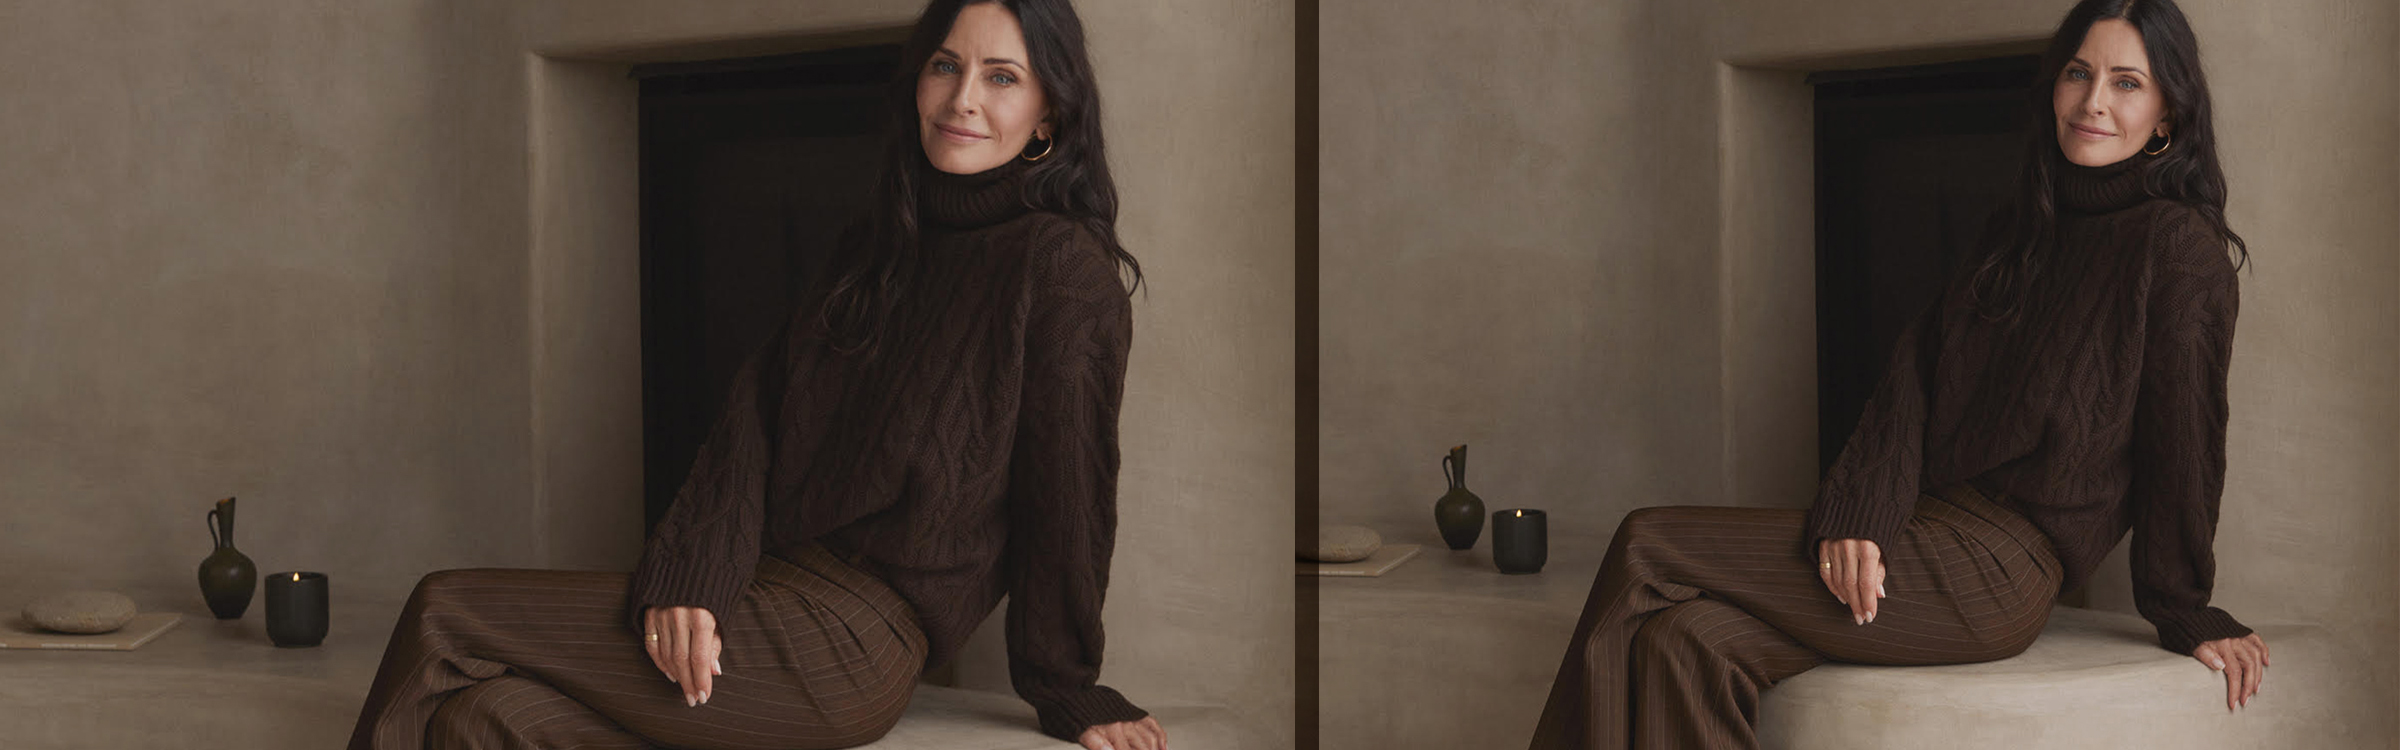 Courteney Cox Shares Her Holy-Grail Vitamin C Serum and Favorite $9 Mascara